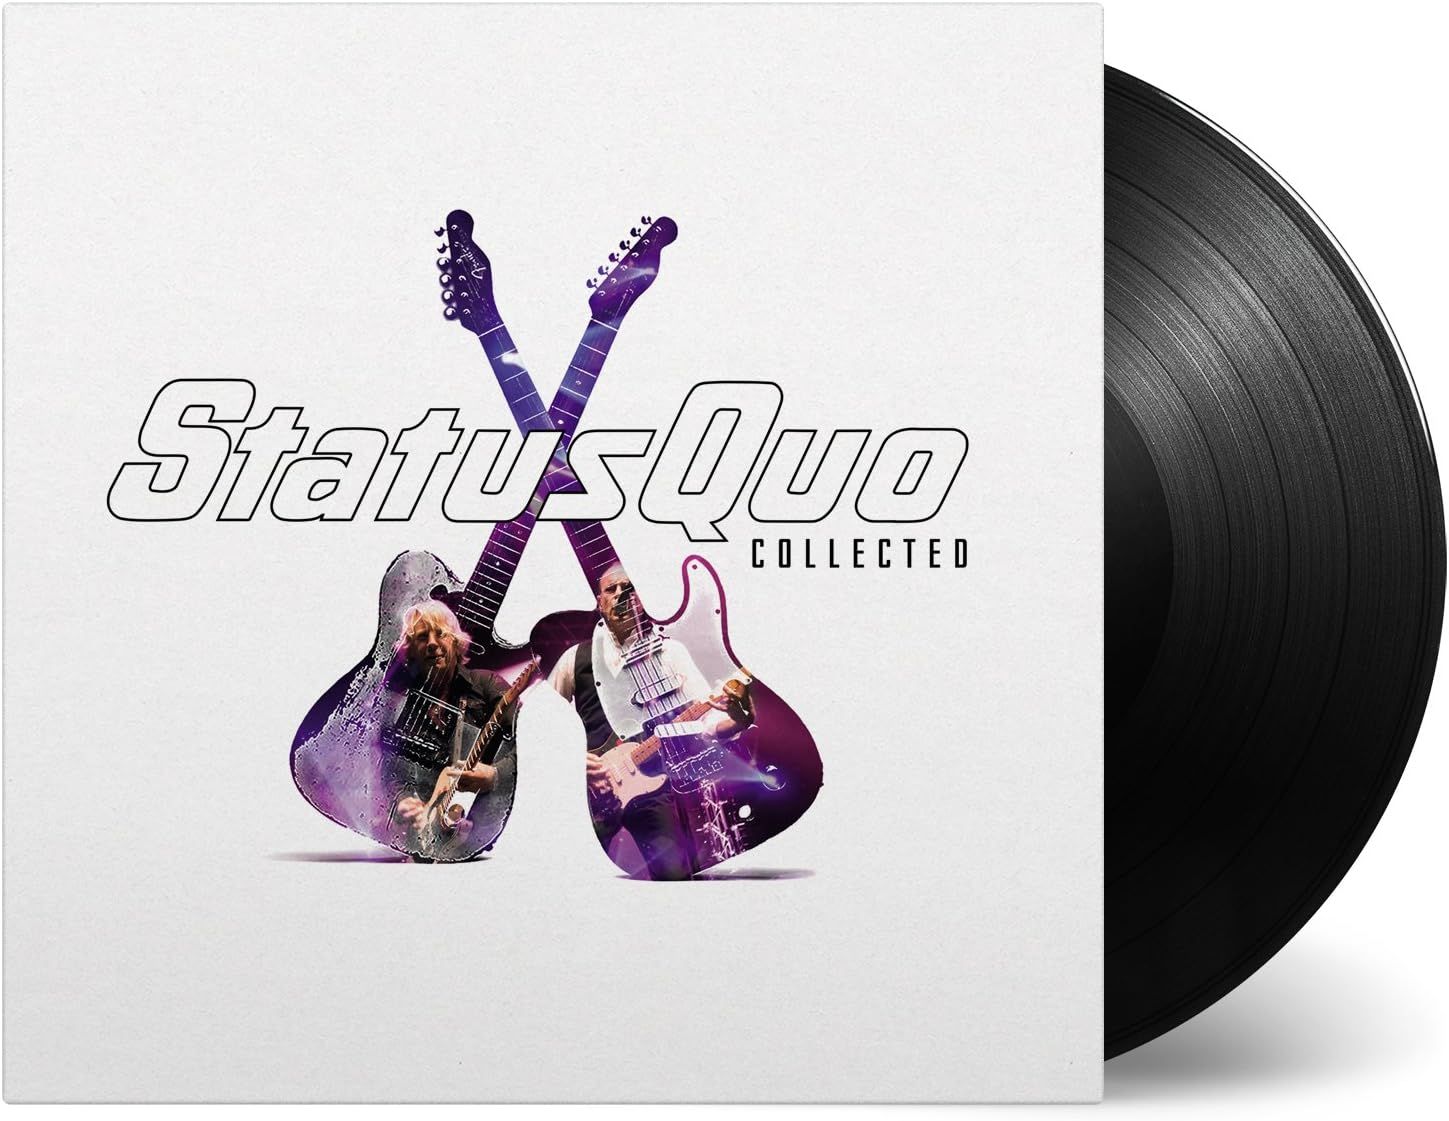 Collection музыка. Status Quo collected. Status Quo "collected, Vinyl". Music collection. Status Quo *** collection ***.